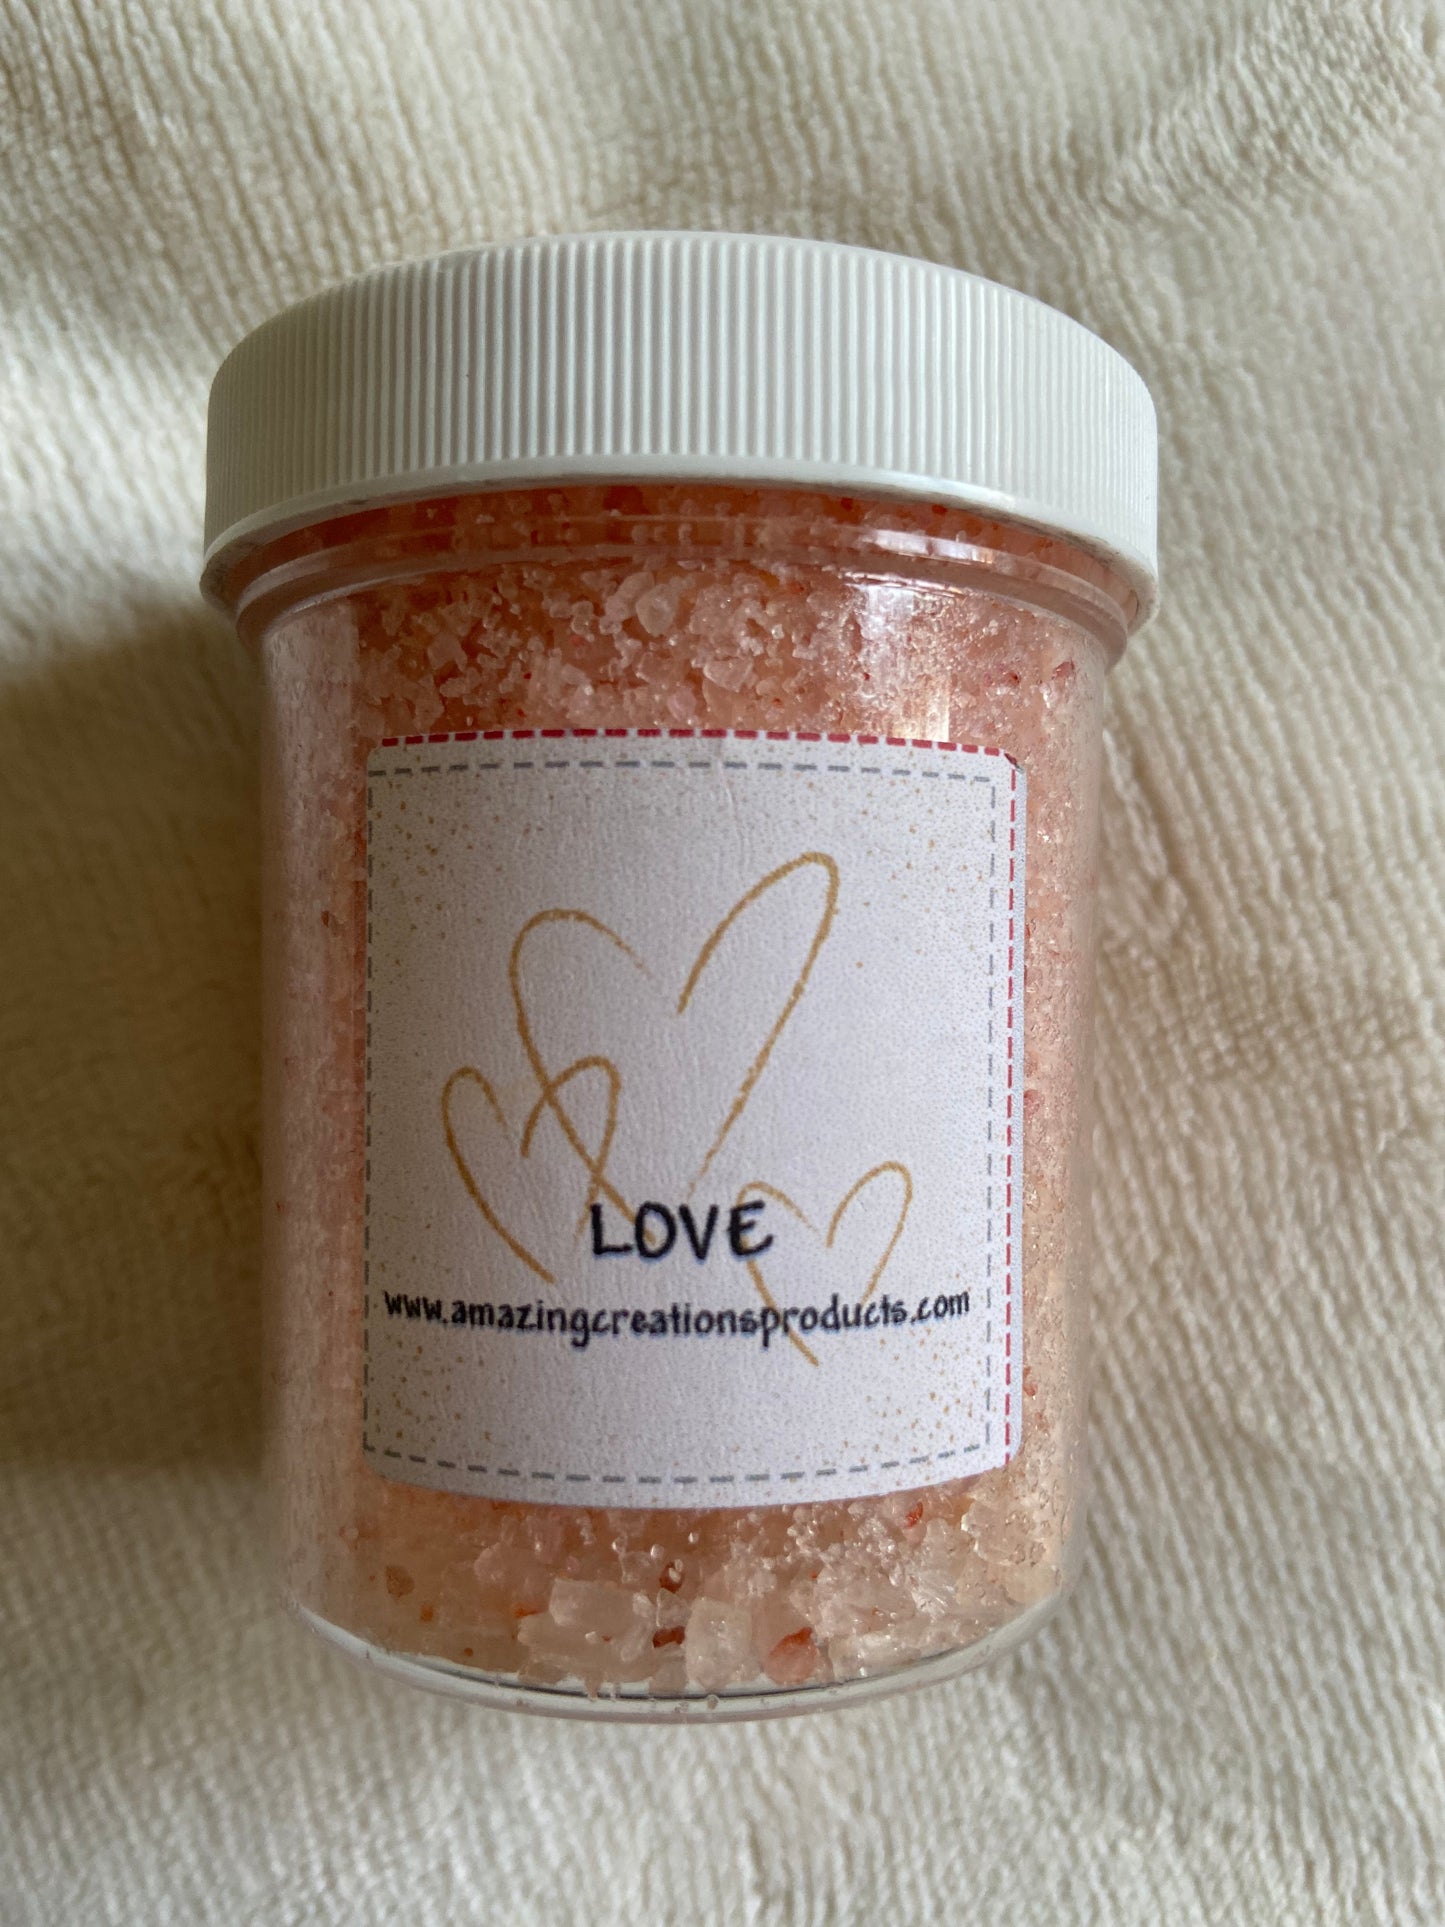  Love Bath Salt - Bath Salts available at Amazing Creations Products . Grab yours for $10.00 today!